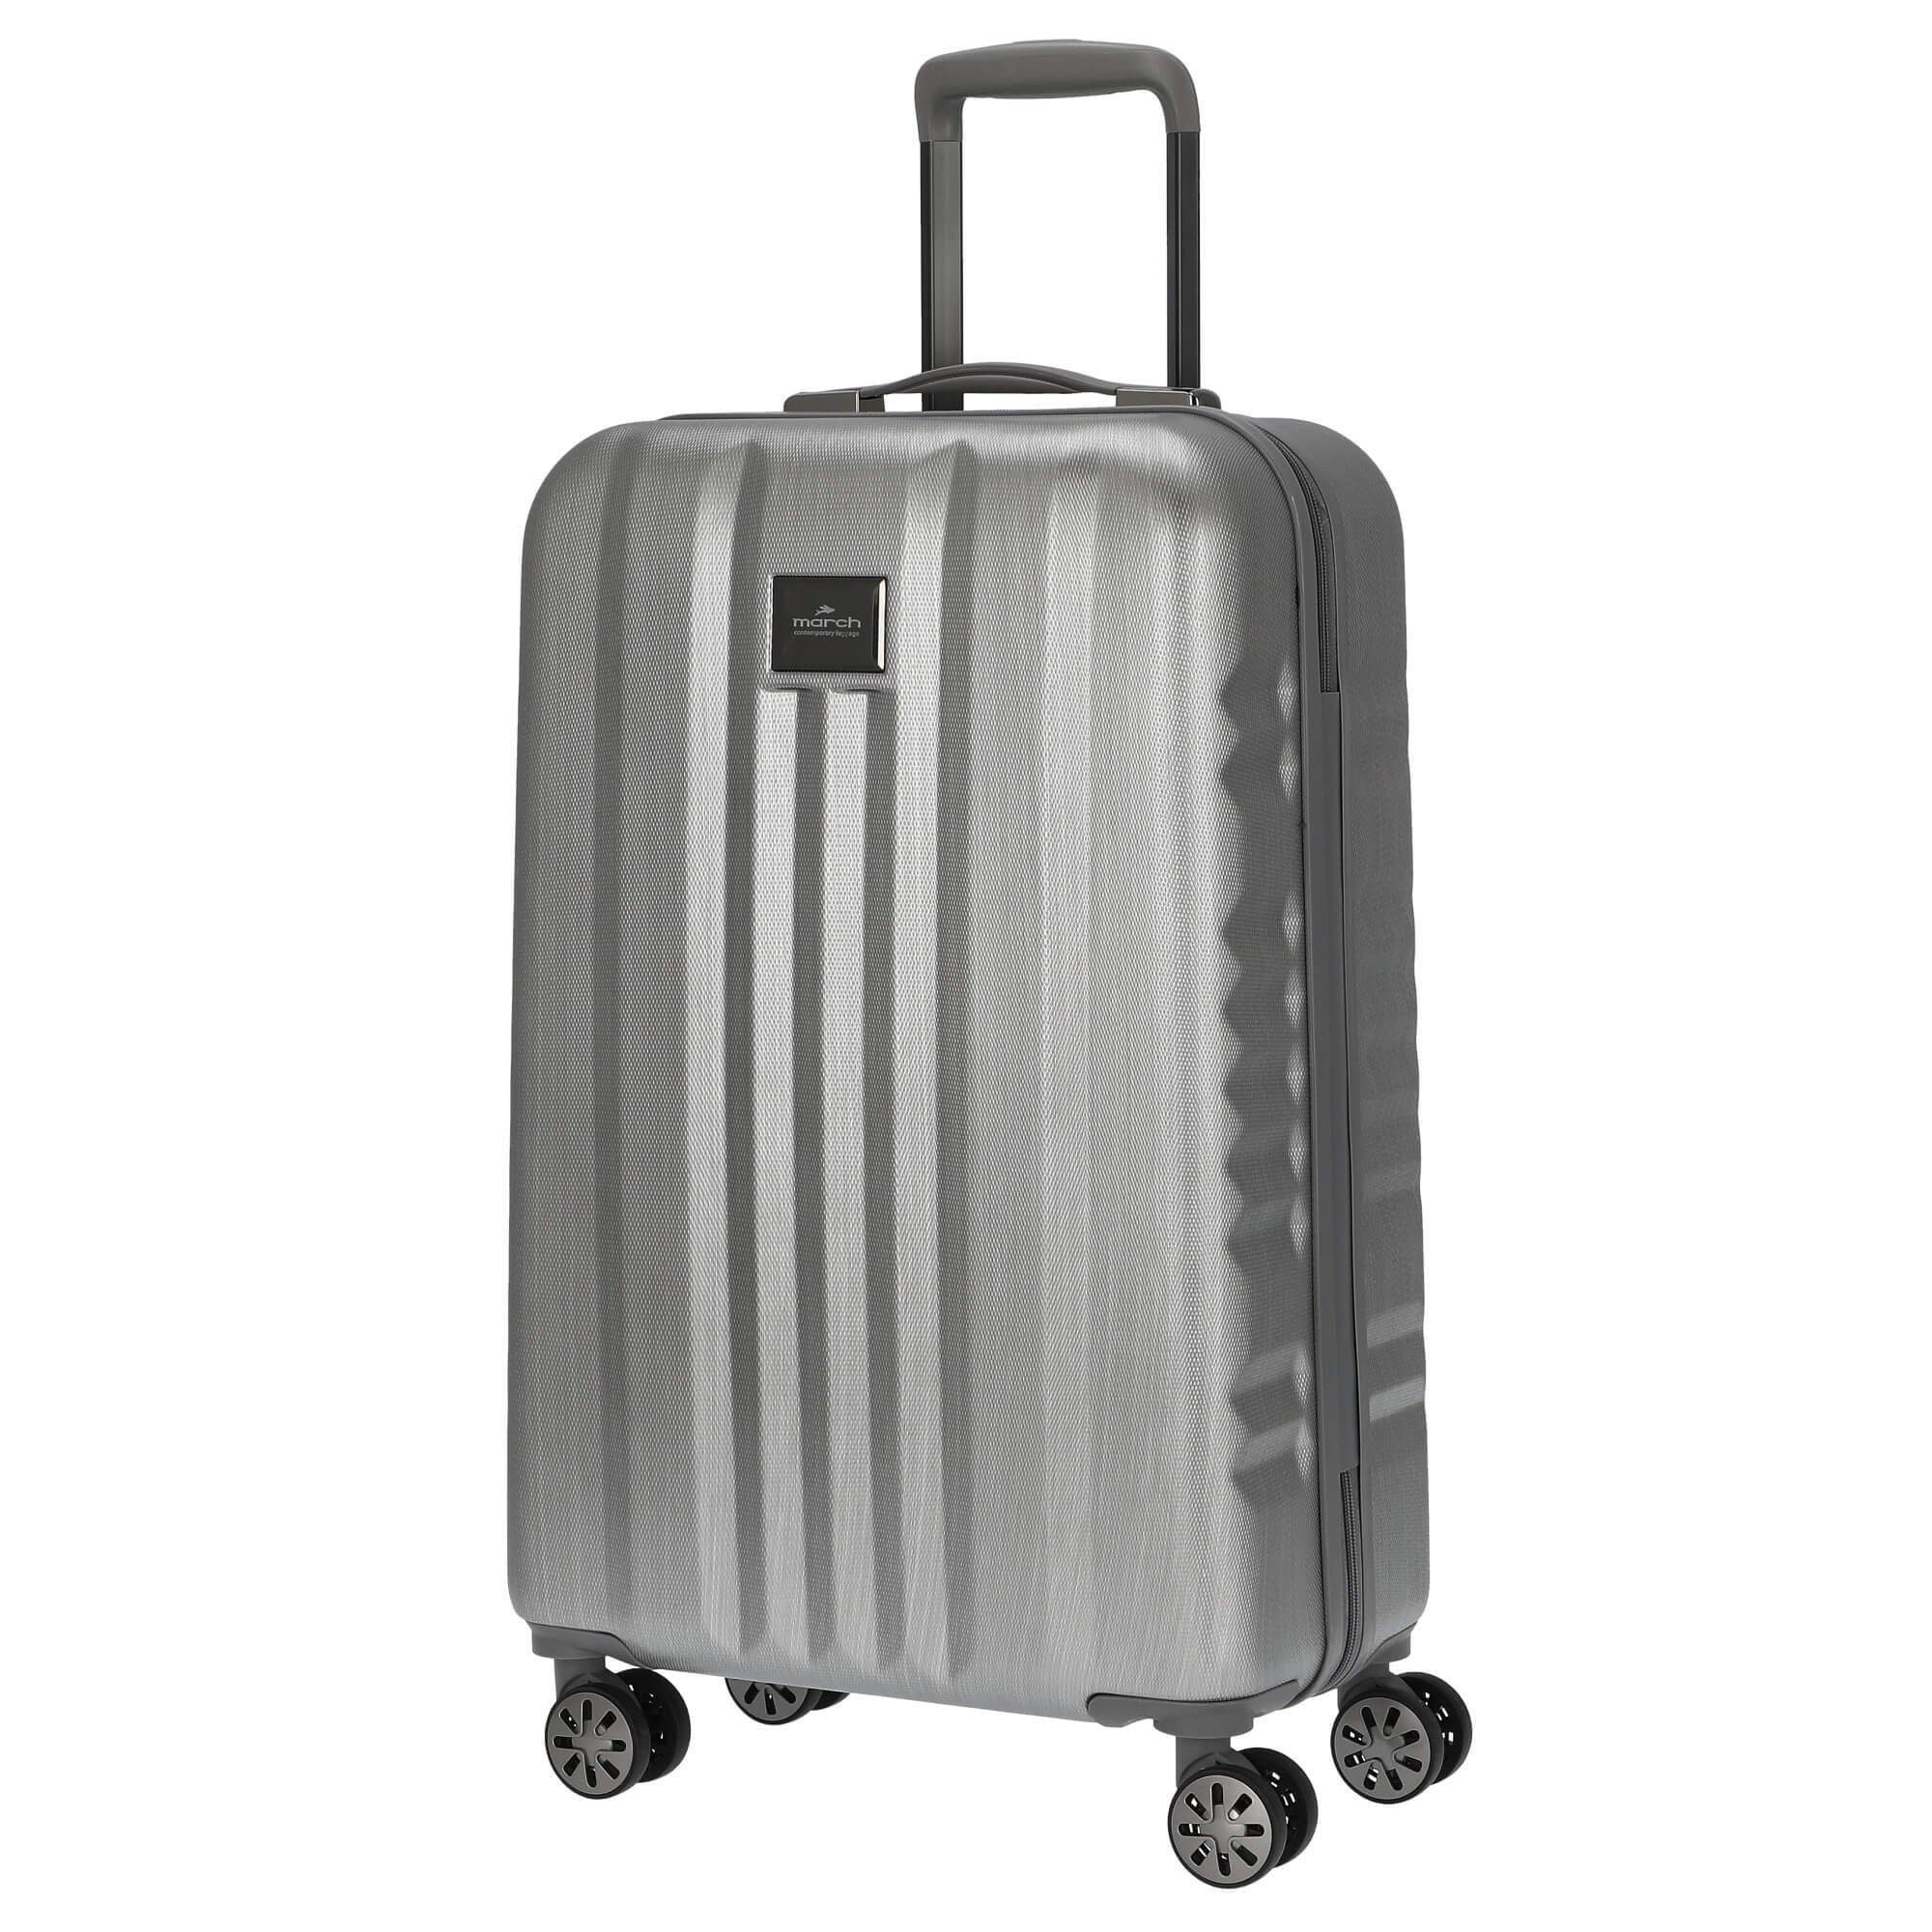 March15 Trading Trolley Fly brushed - silver Rollen 4 brushed M 4-Rollen-Trolley 65 cm